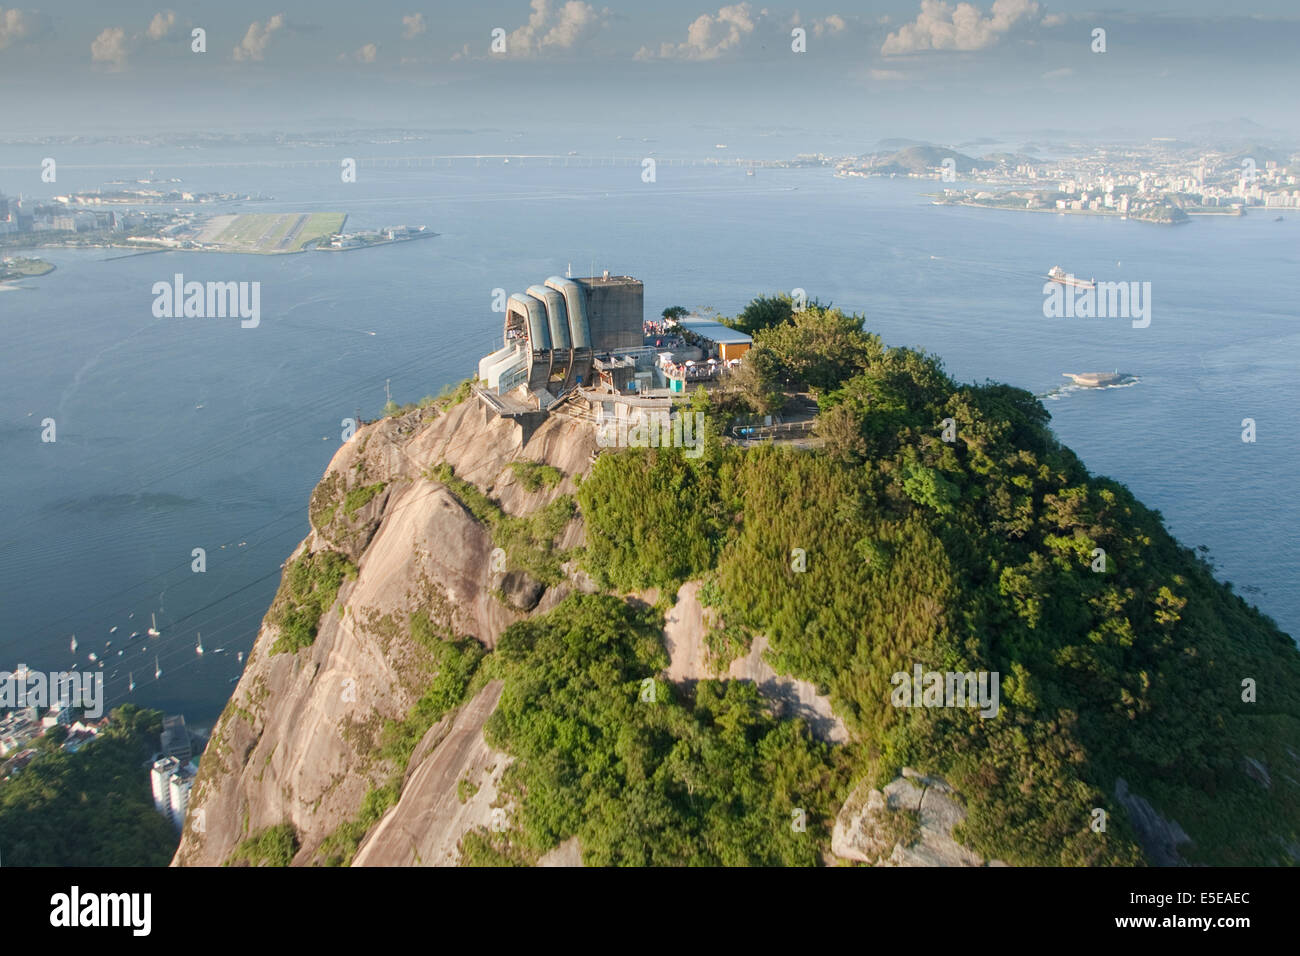 Aerial view of the Sugar Loaf mountain cable car station with Santos Dumont aiport and Guanabara Bay, Rio de Janeiro, Brazil Stock Photo